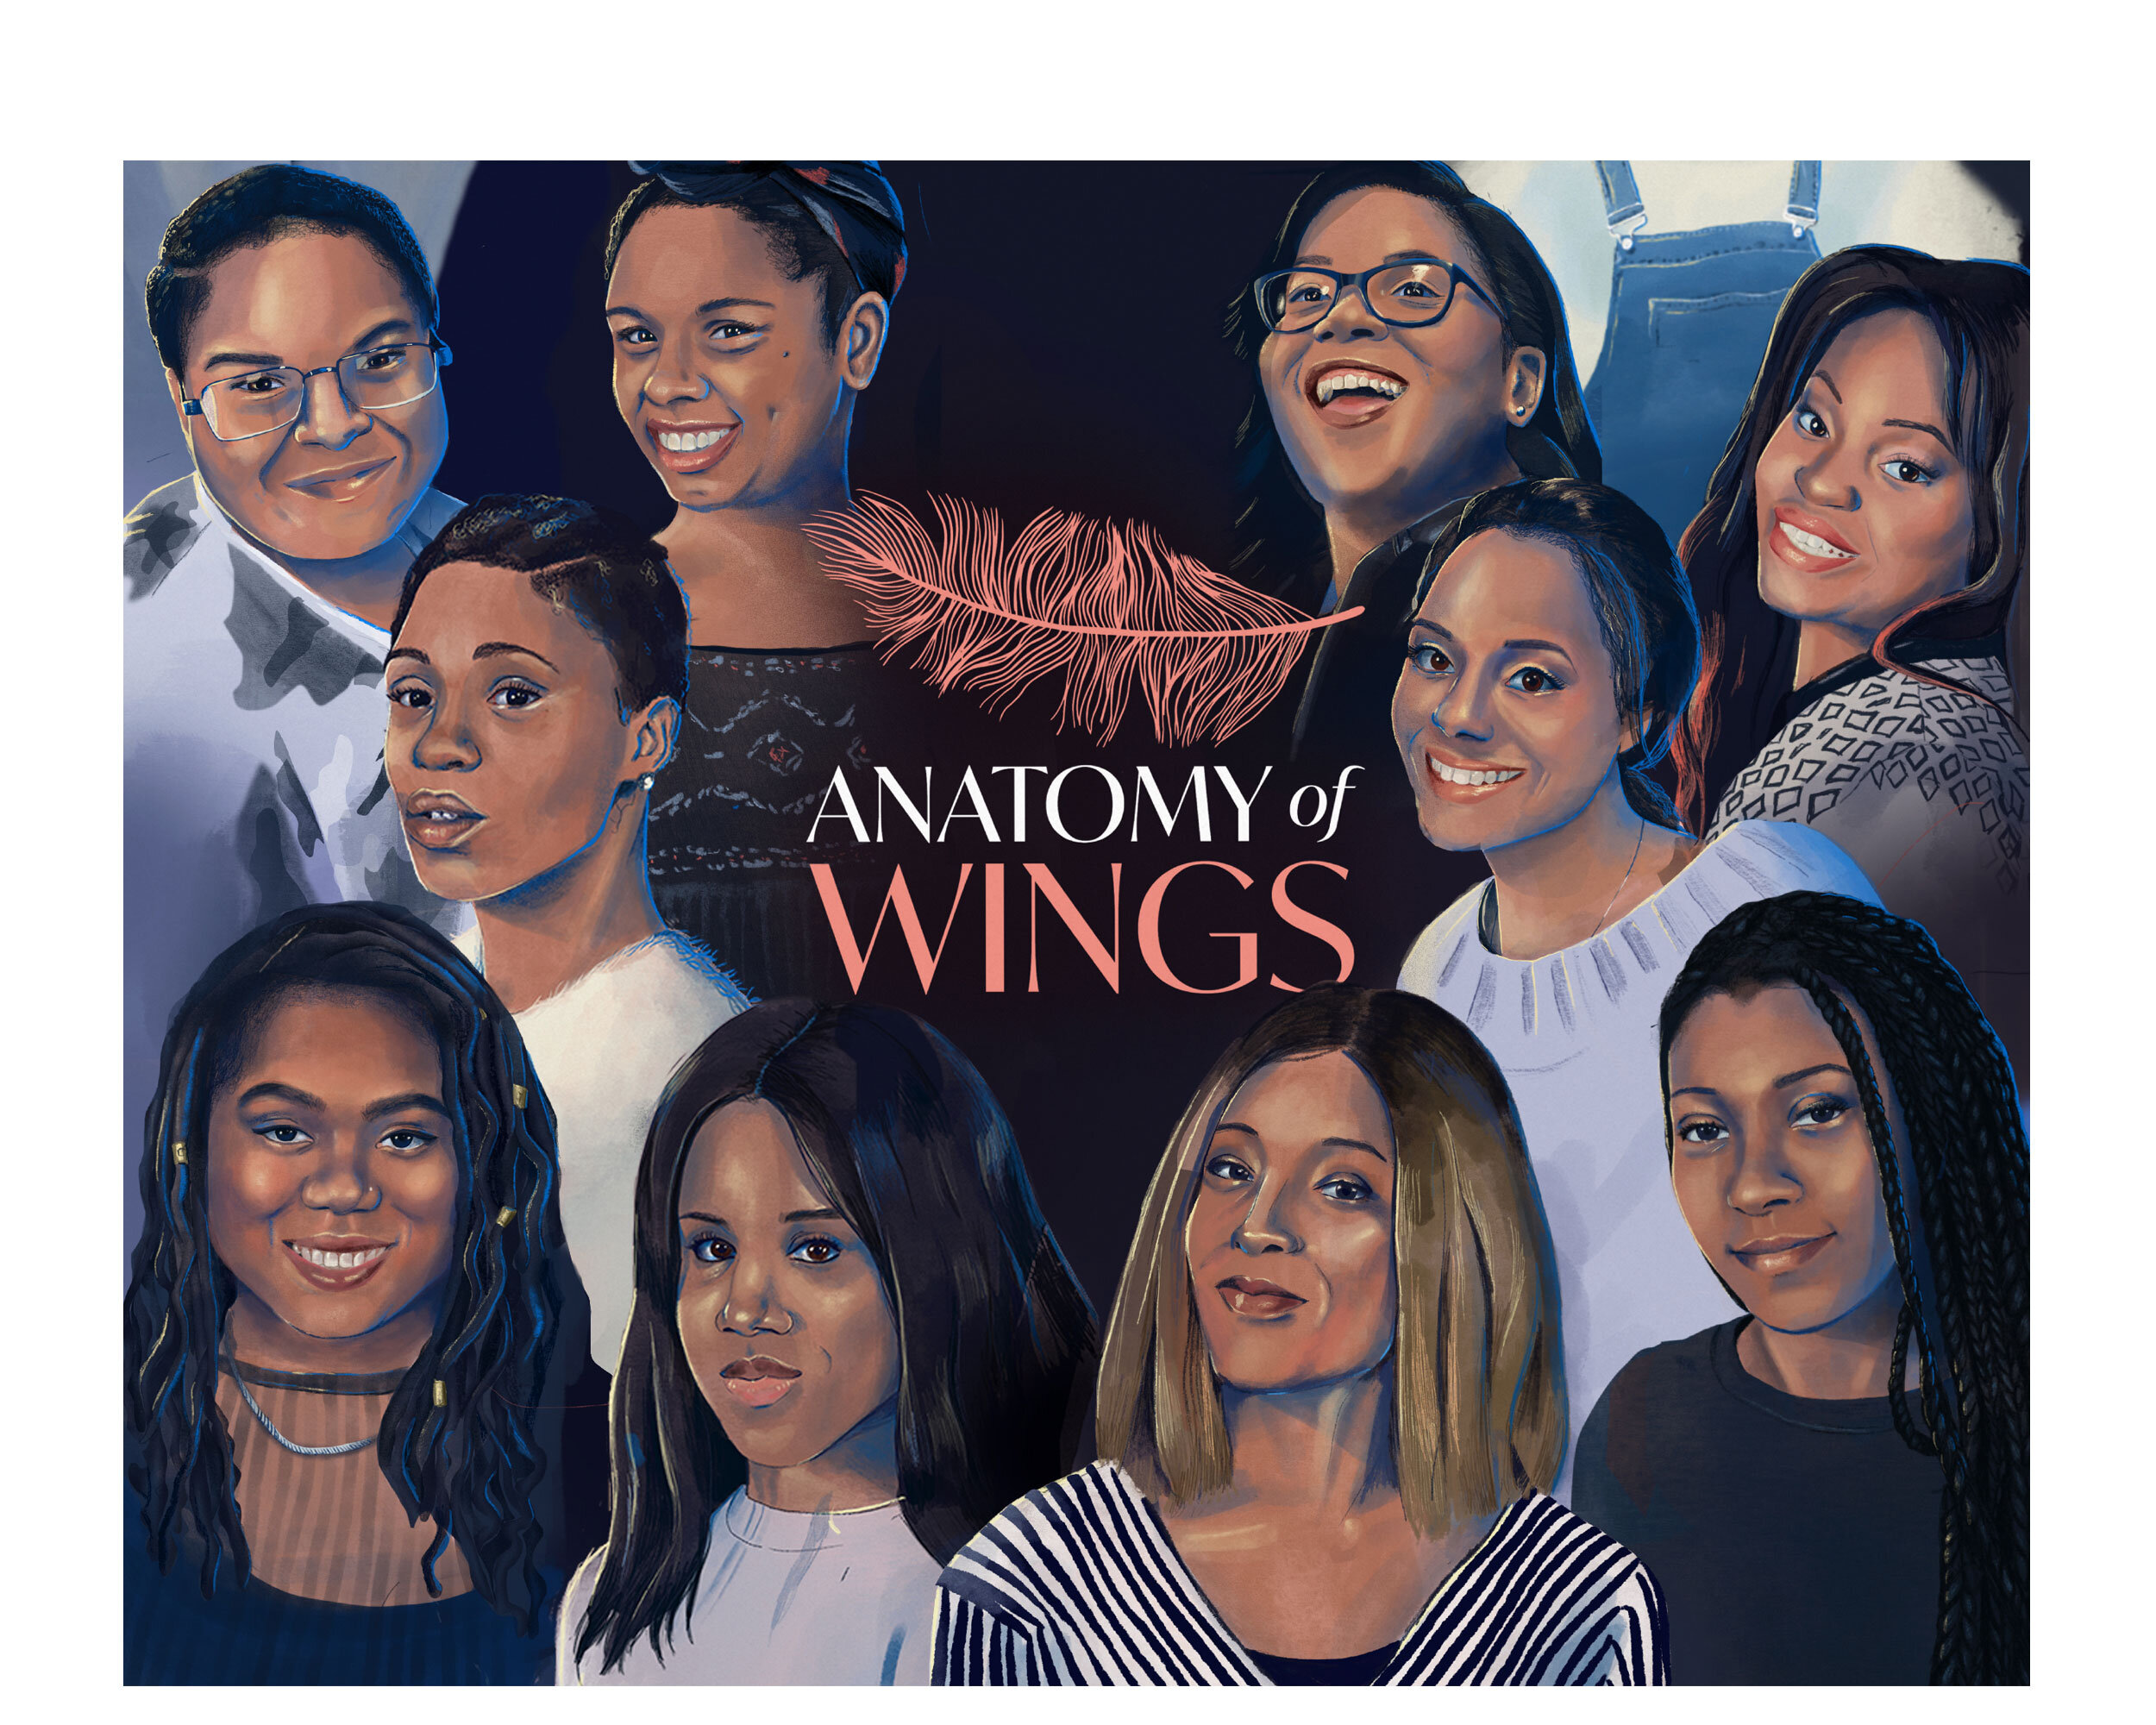 Nikiea Redmond and Kirsten D’Andrea Hollander Discuss Their 10-Year Documentary with Anatomy of Wings | Slamdance 2021 [Exclusive Interview]